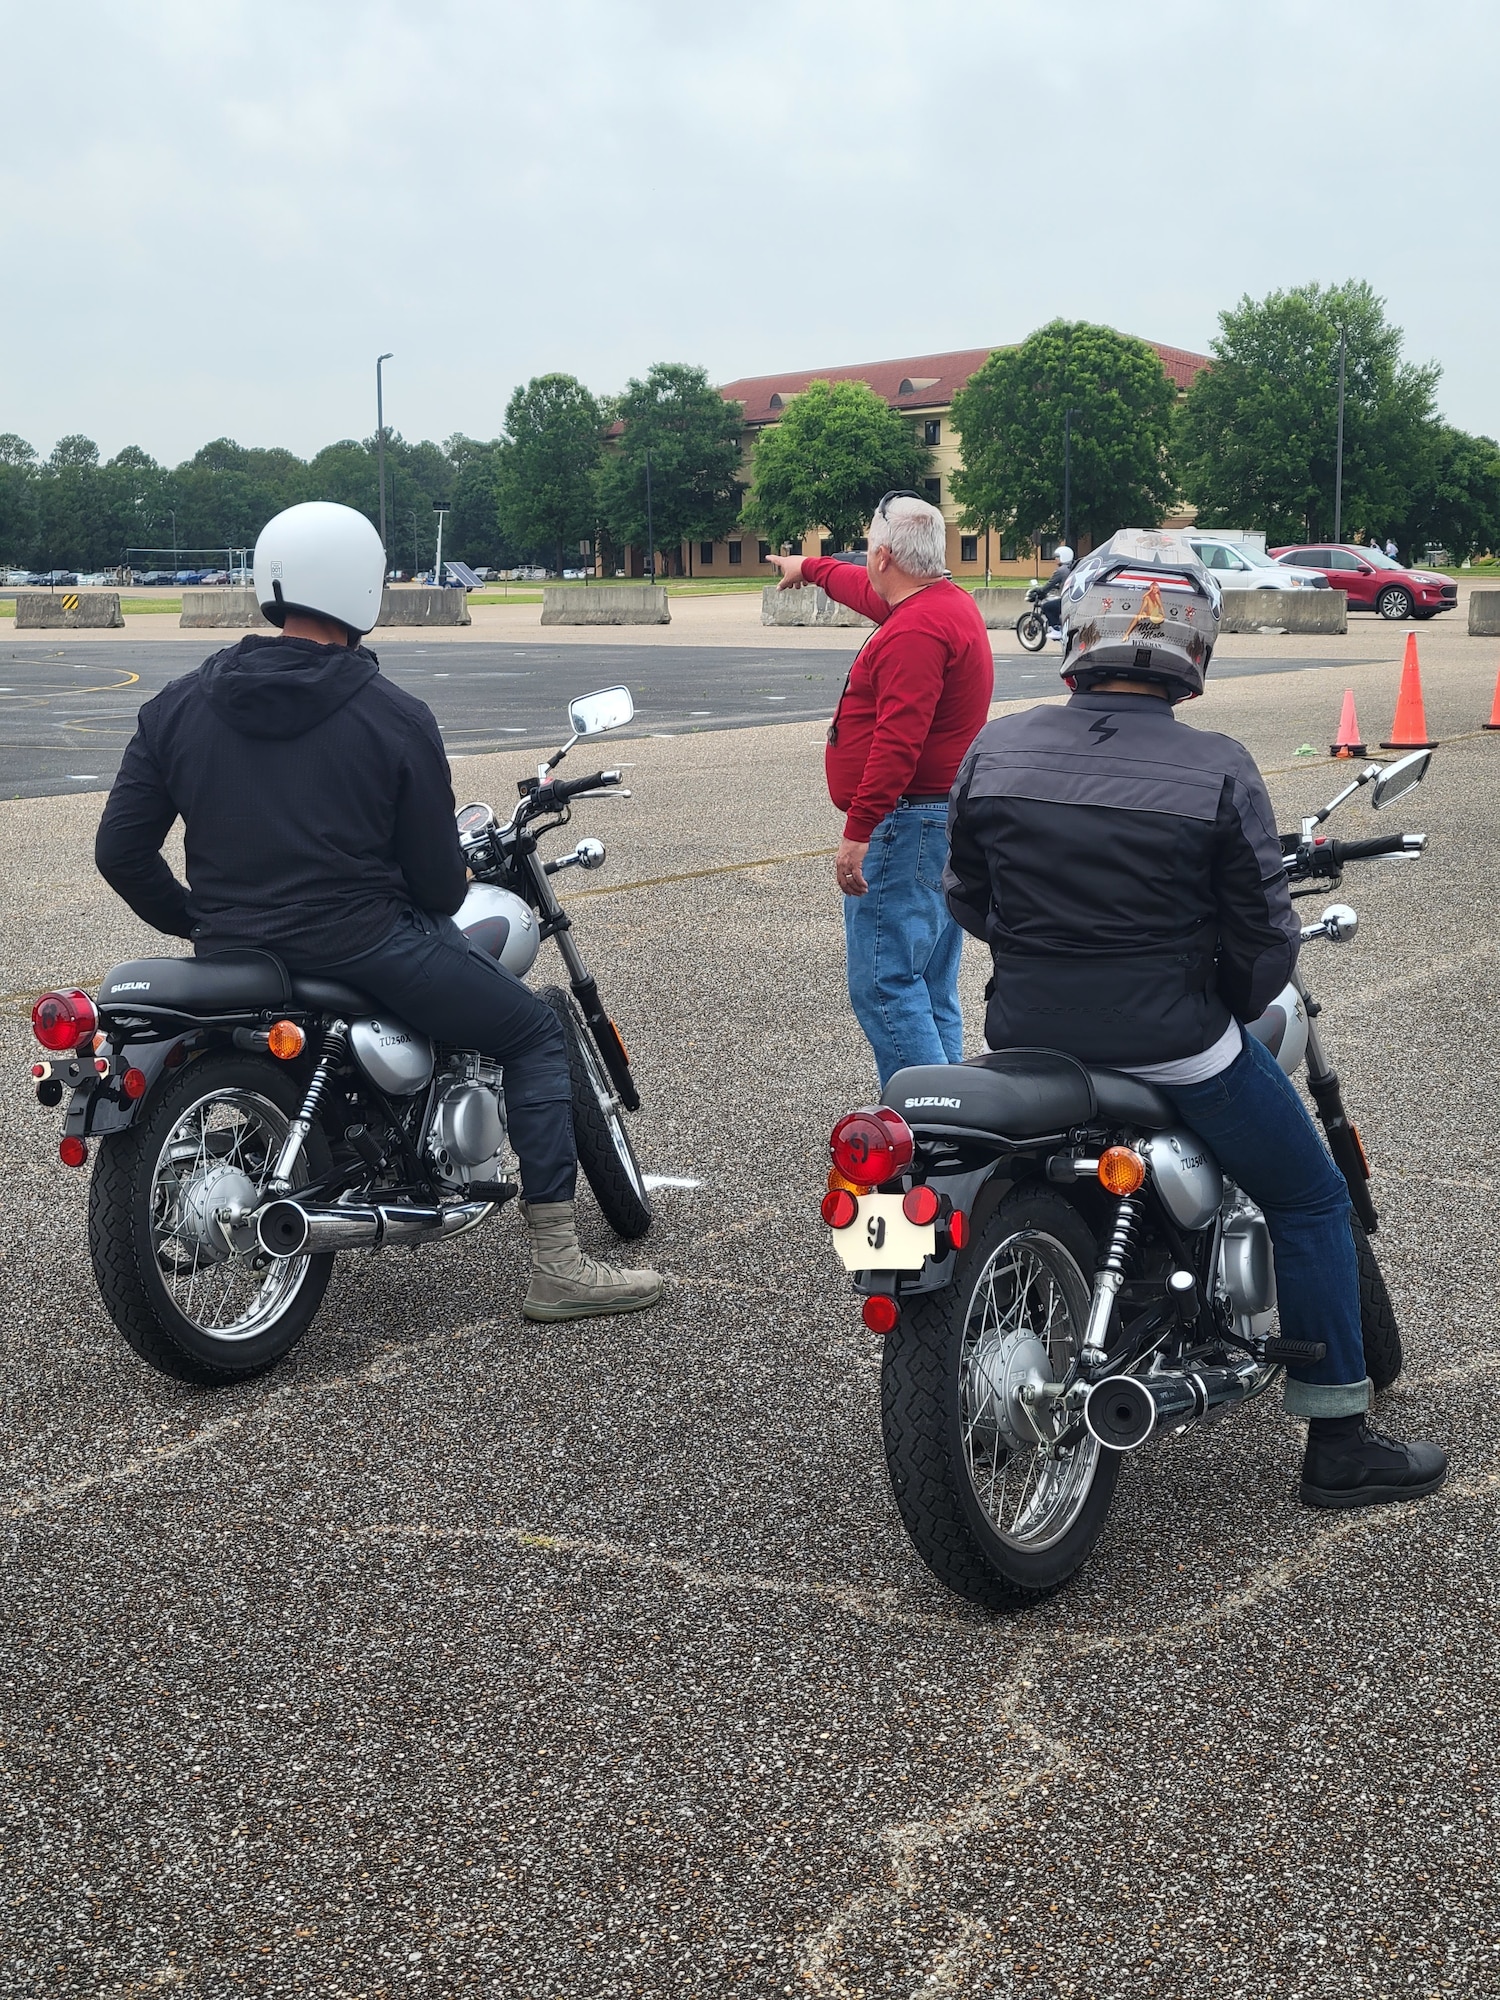 May is Motorcycle Safety Month, and the installation is reflecting on recent losses due to private motor vehicle accidents. The safety office offers both beginner and experienced riders training courses that all active-duty members are required to attend if they are going to ride a motorcycle on or off duty. Civilian riders are highly encouraged to also take part in this training.